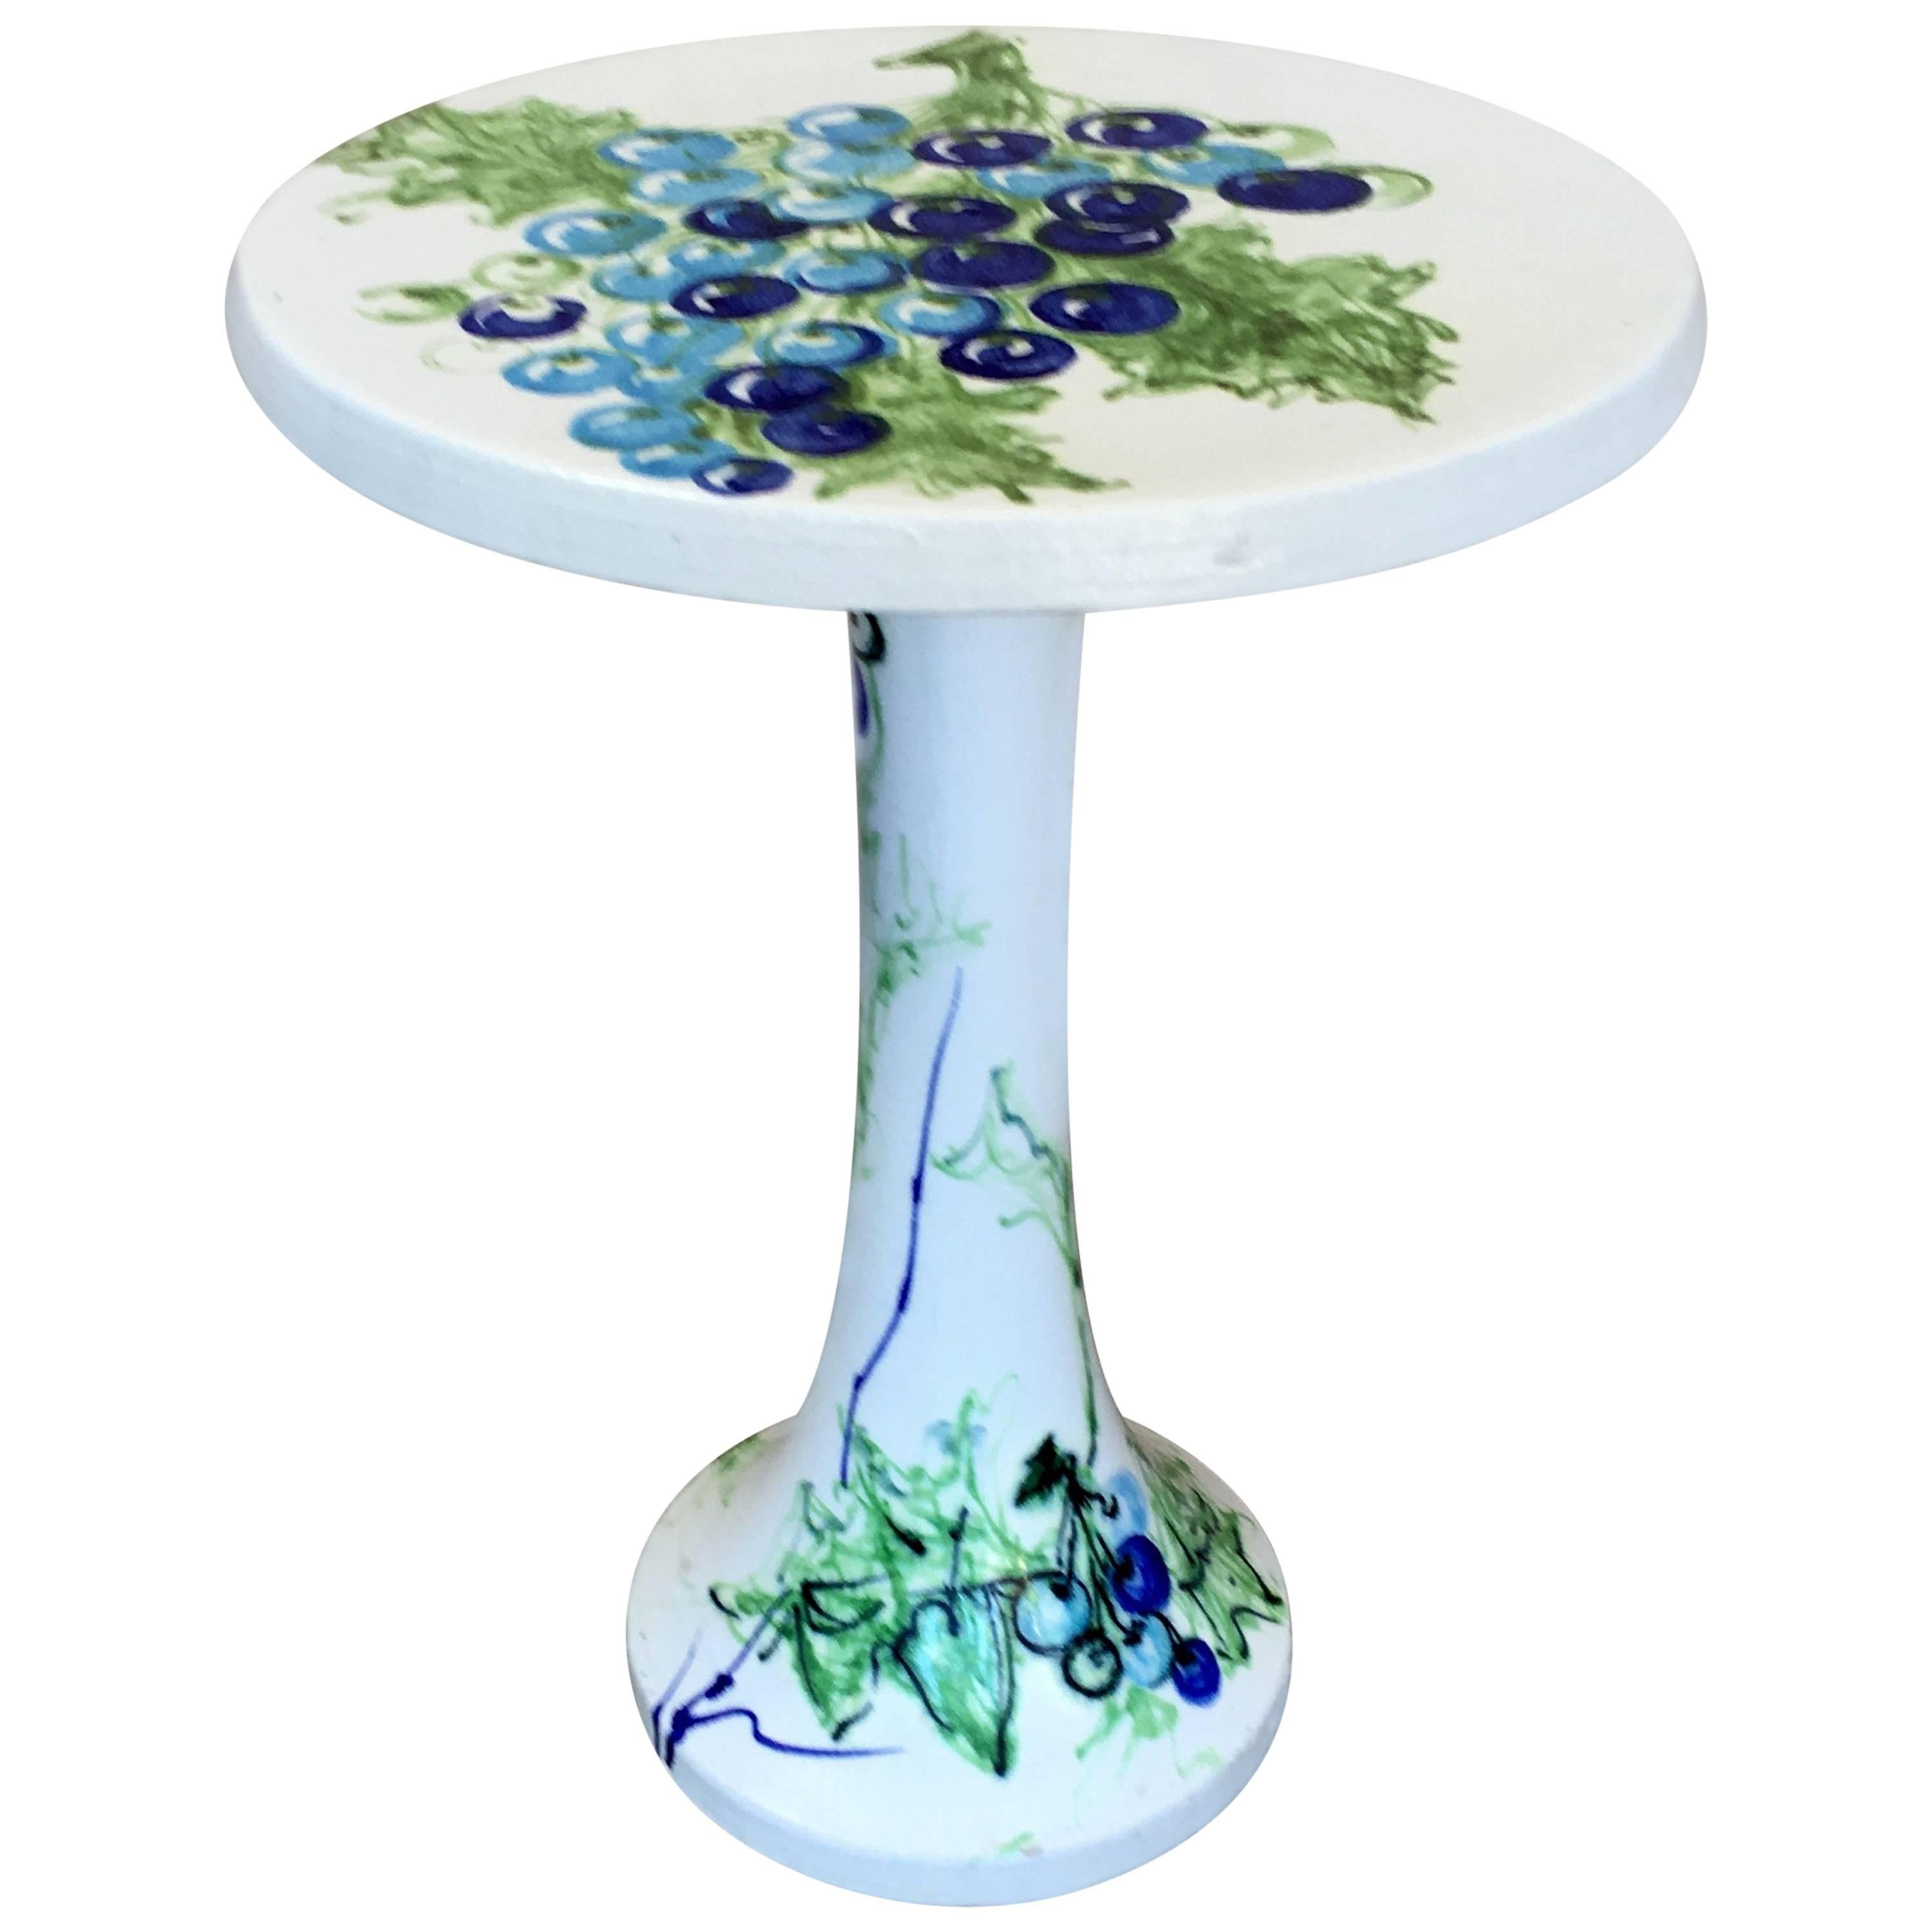 Raymor Ceramic Wine Table with Grapevine Decoration For Sale